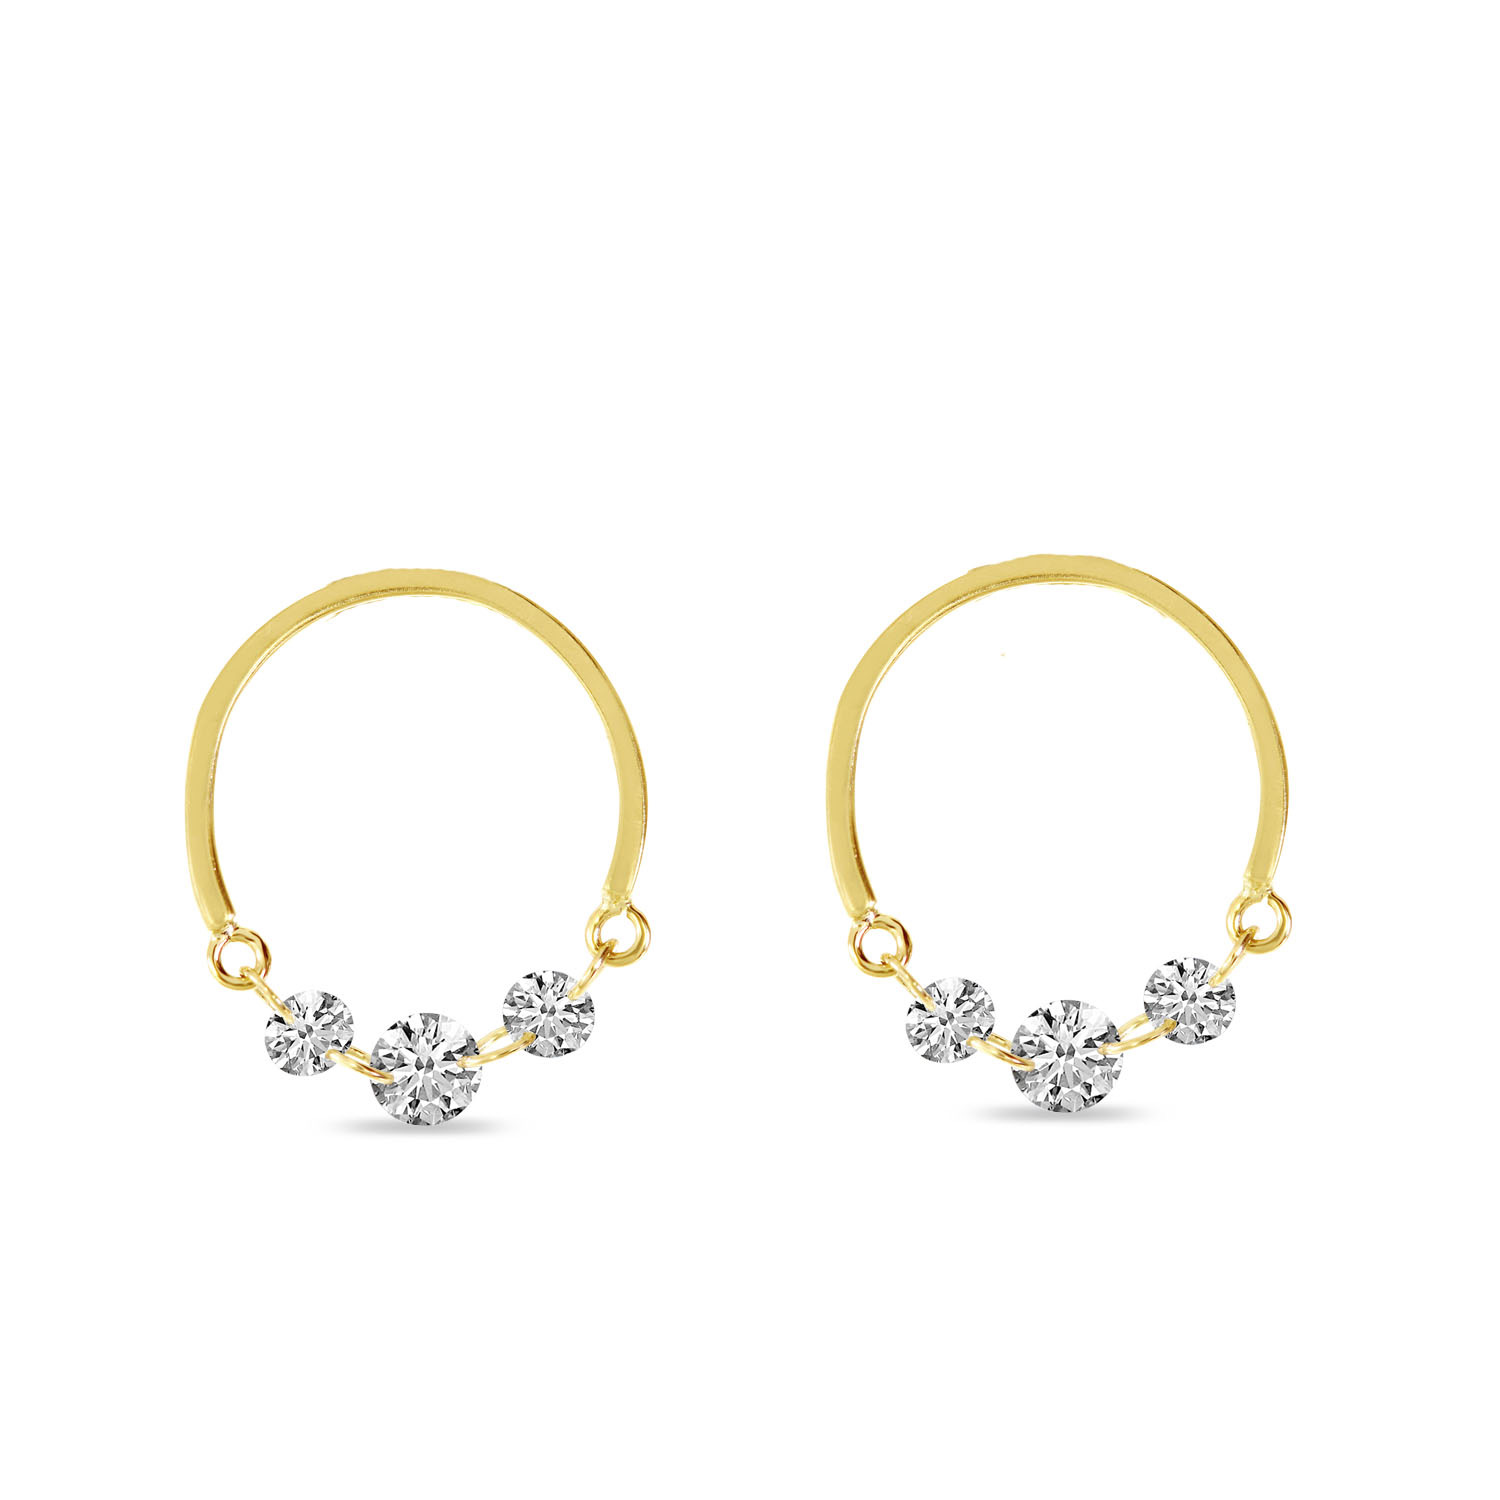 Buy Gold Plated Pink Quartz Floral Half Hoop Earrings for Western Outfit  Online at Silvermerc – Silvermerc Designs